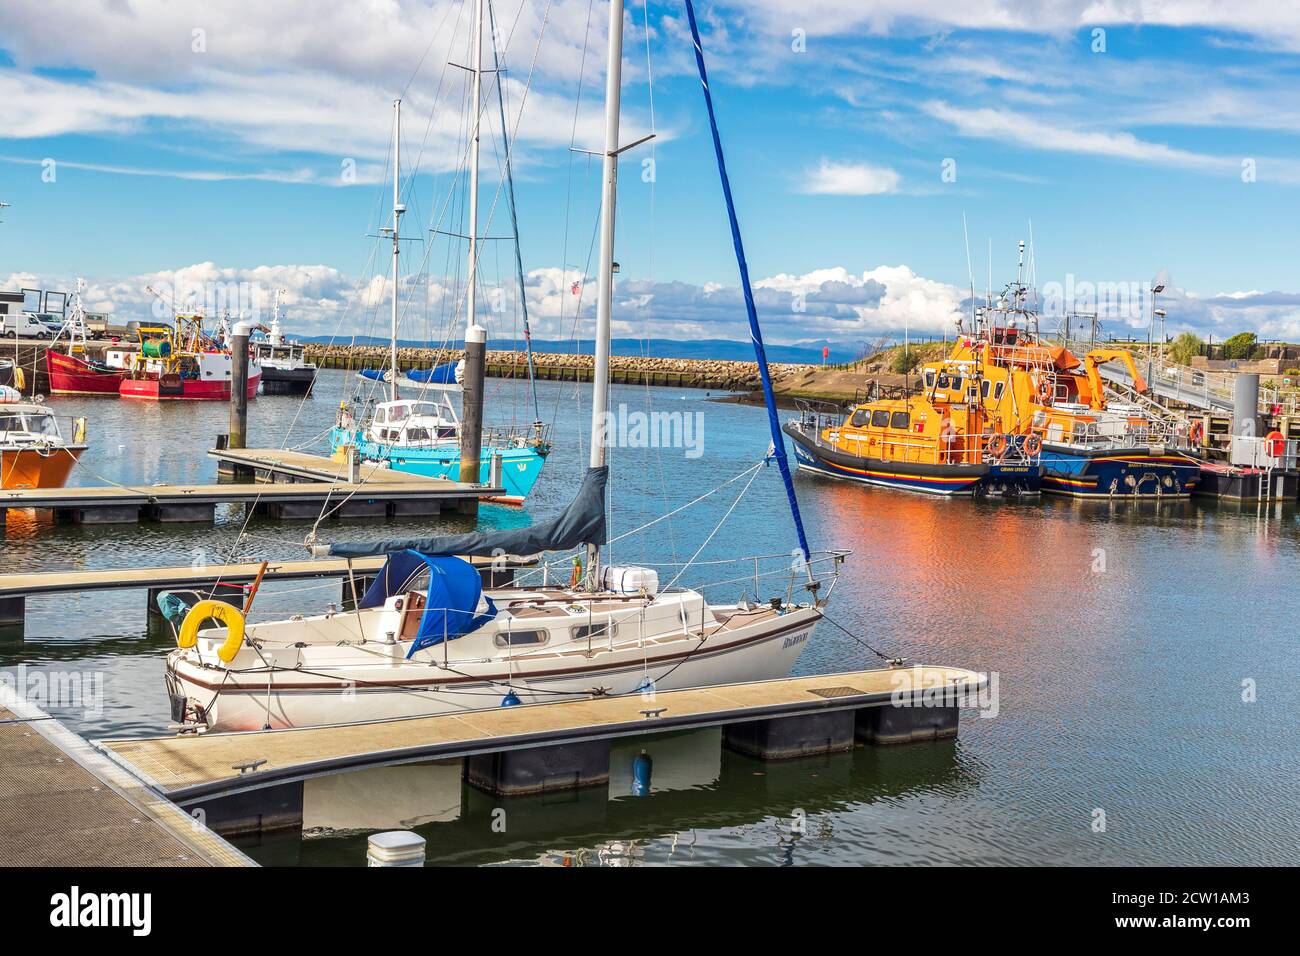 General view of Girvan harbour, Ayrshire Scotland showing small fishing boats and private boats and lifeboats, UK on the Firth of Clyde Stock Photo